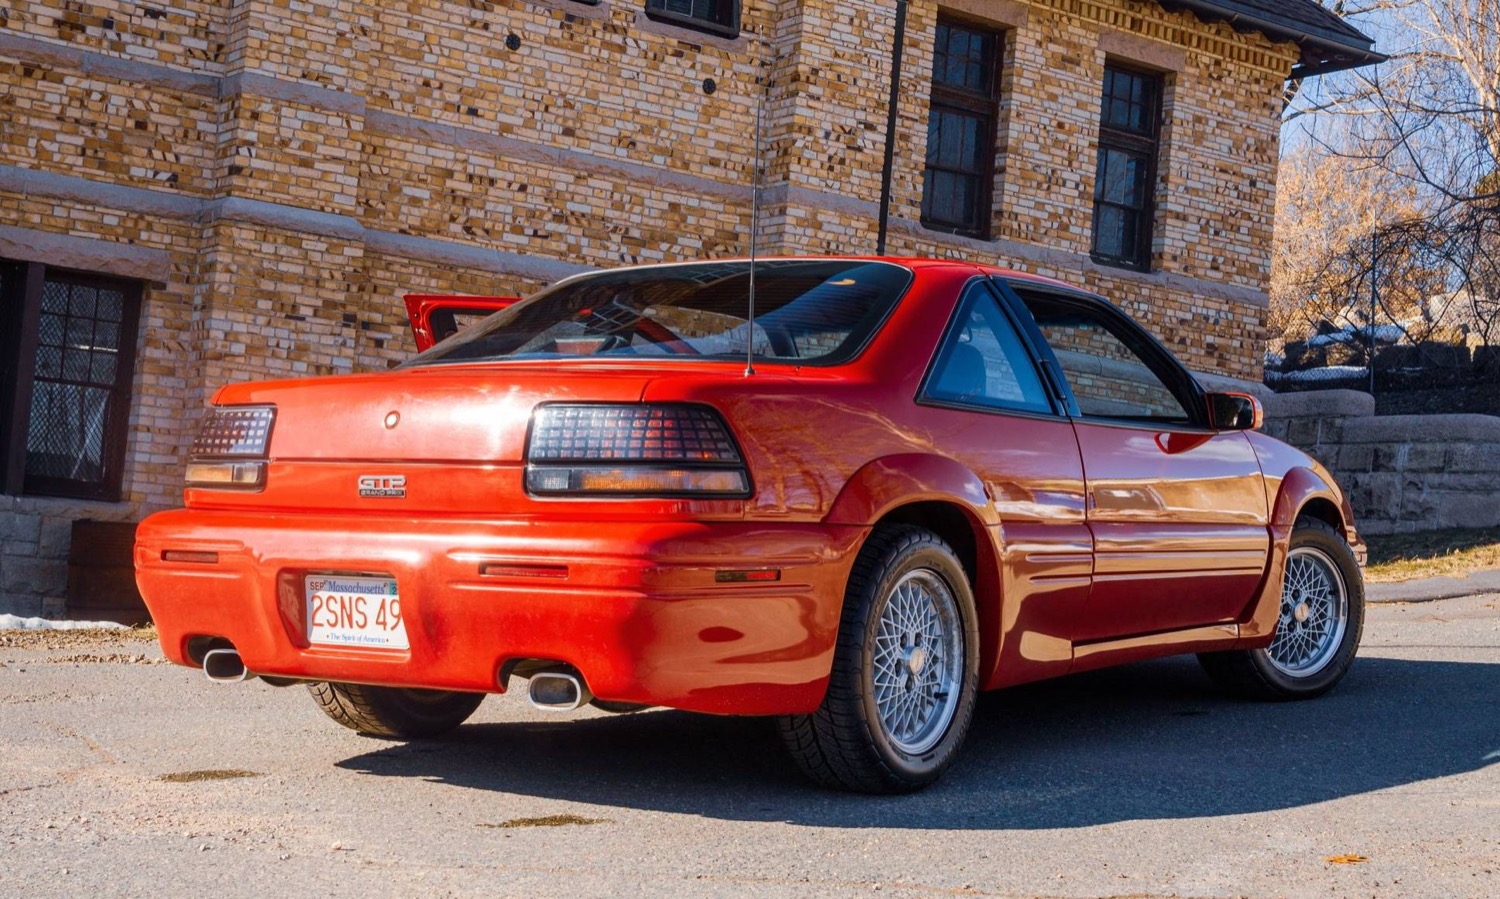 1995 Pontiac Grand Prix With Less Than 3,000 Miles Up For Sale: Video